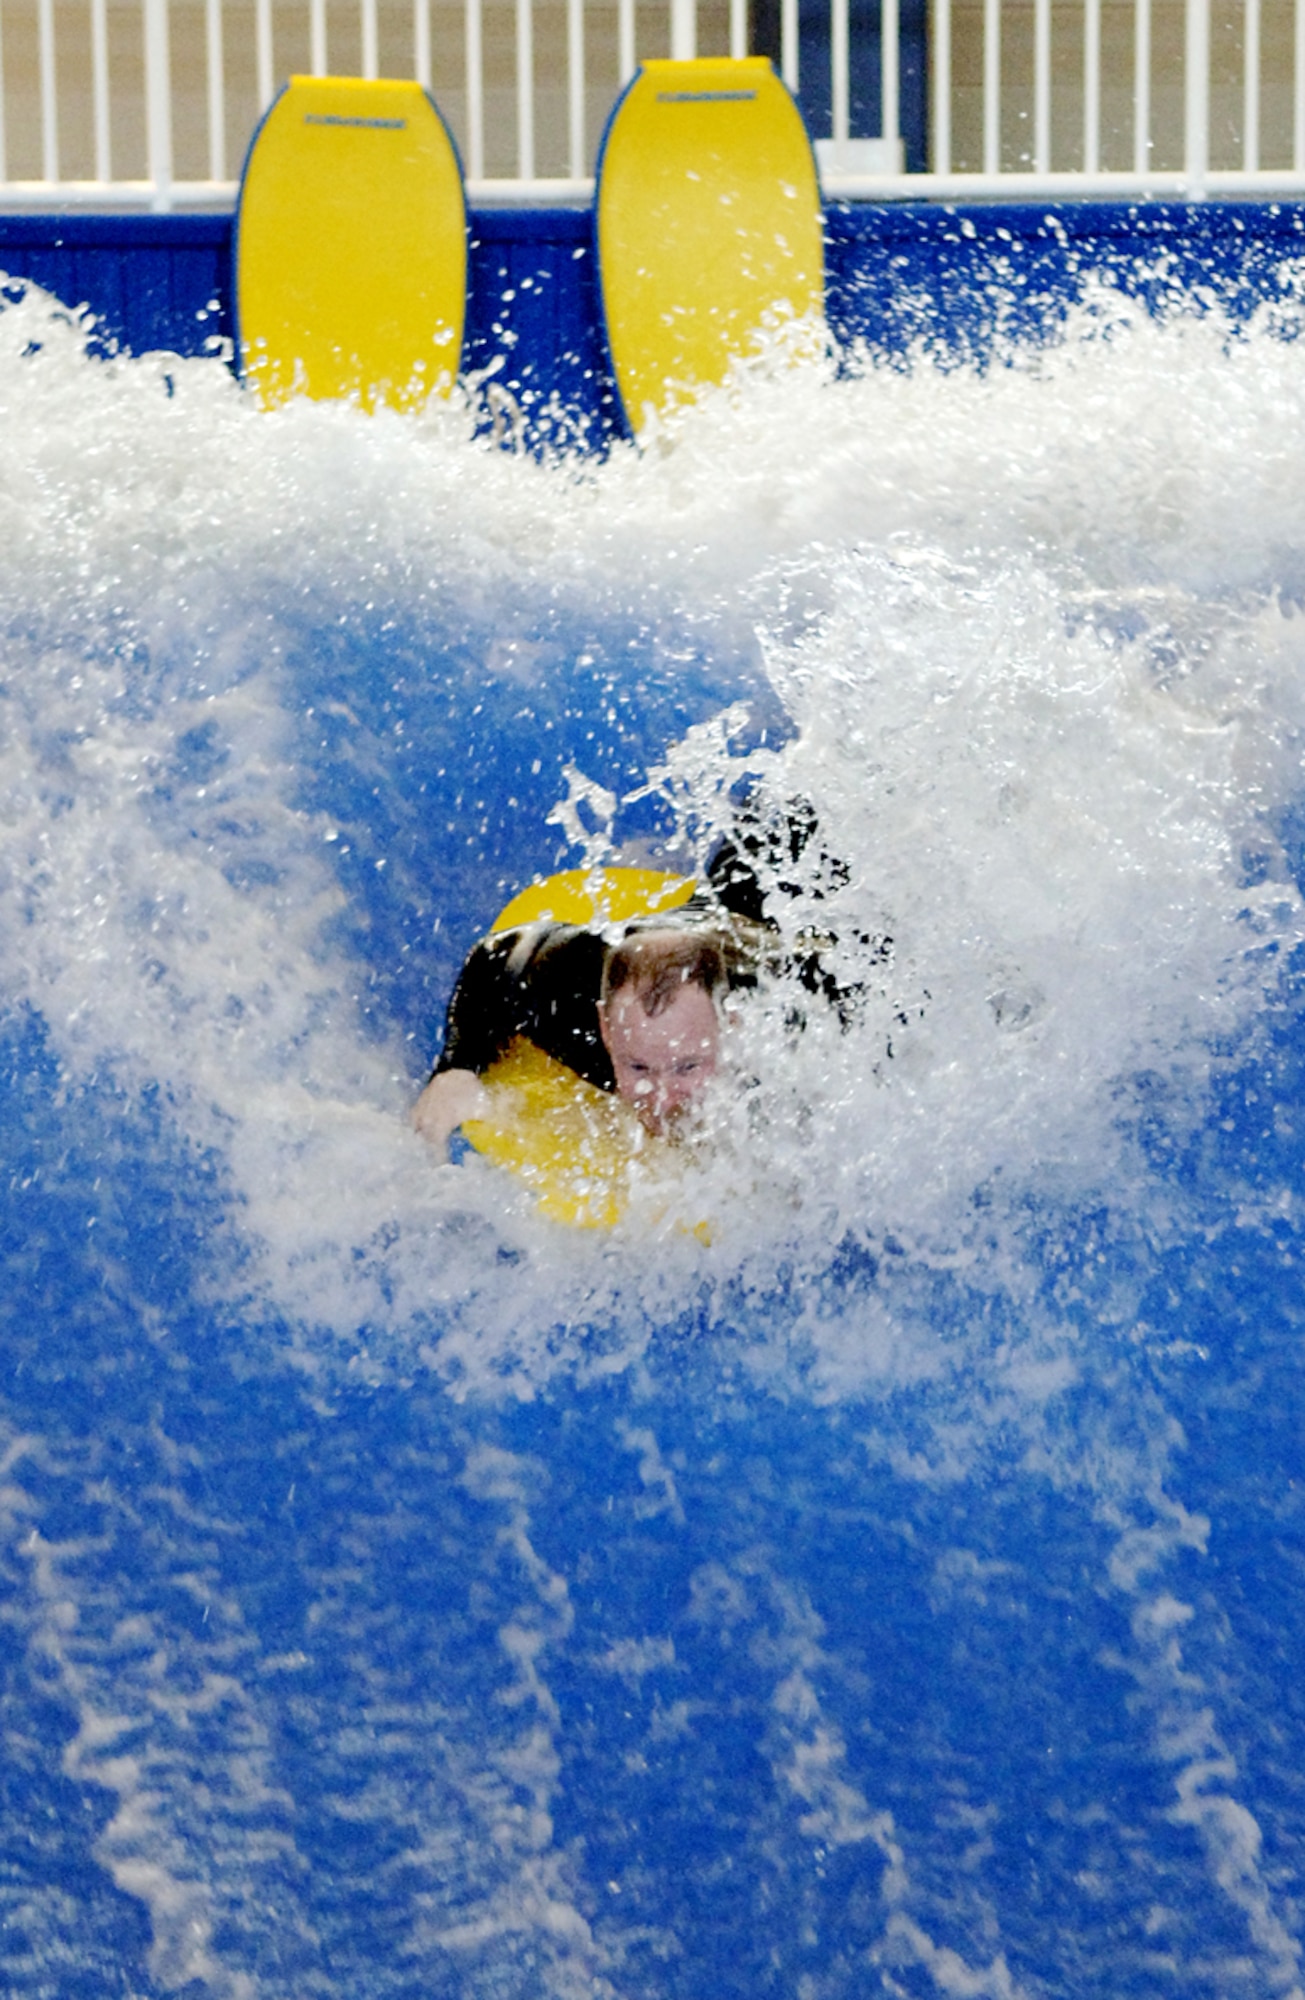 Justin LaFerrer, an occupational therapist, demonstrates the Flowrider, a machine that creates wave action to help injured patients with balance and strengthening exercises at the Center for the Intrepid in San Antonio Jan. 29.  Four floors of state-of-art equipment make the $50 million-dollar facility the only one of its kind in the world. (U.S. Air Force photo/Daren Reehl)